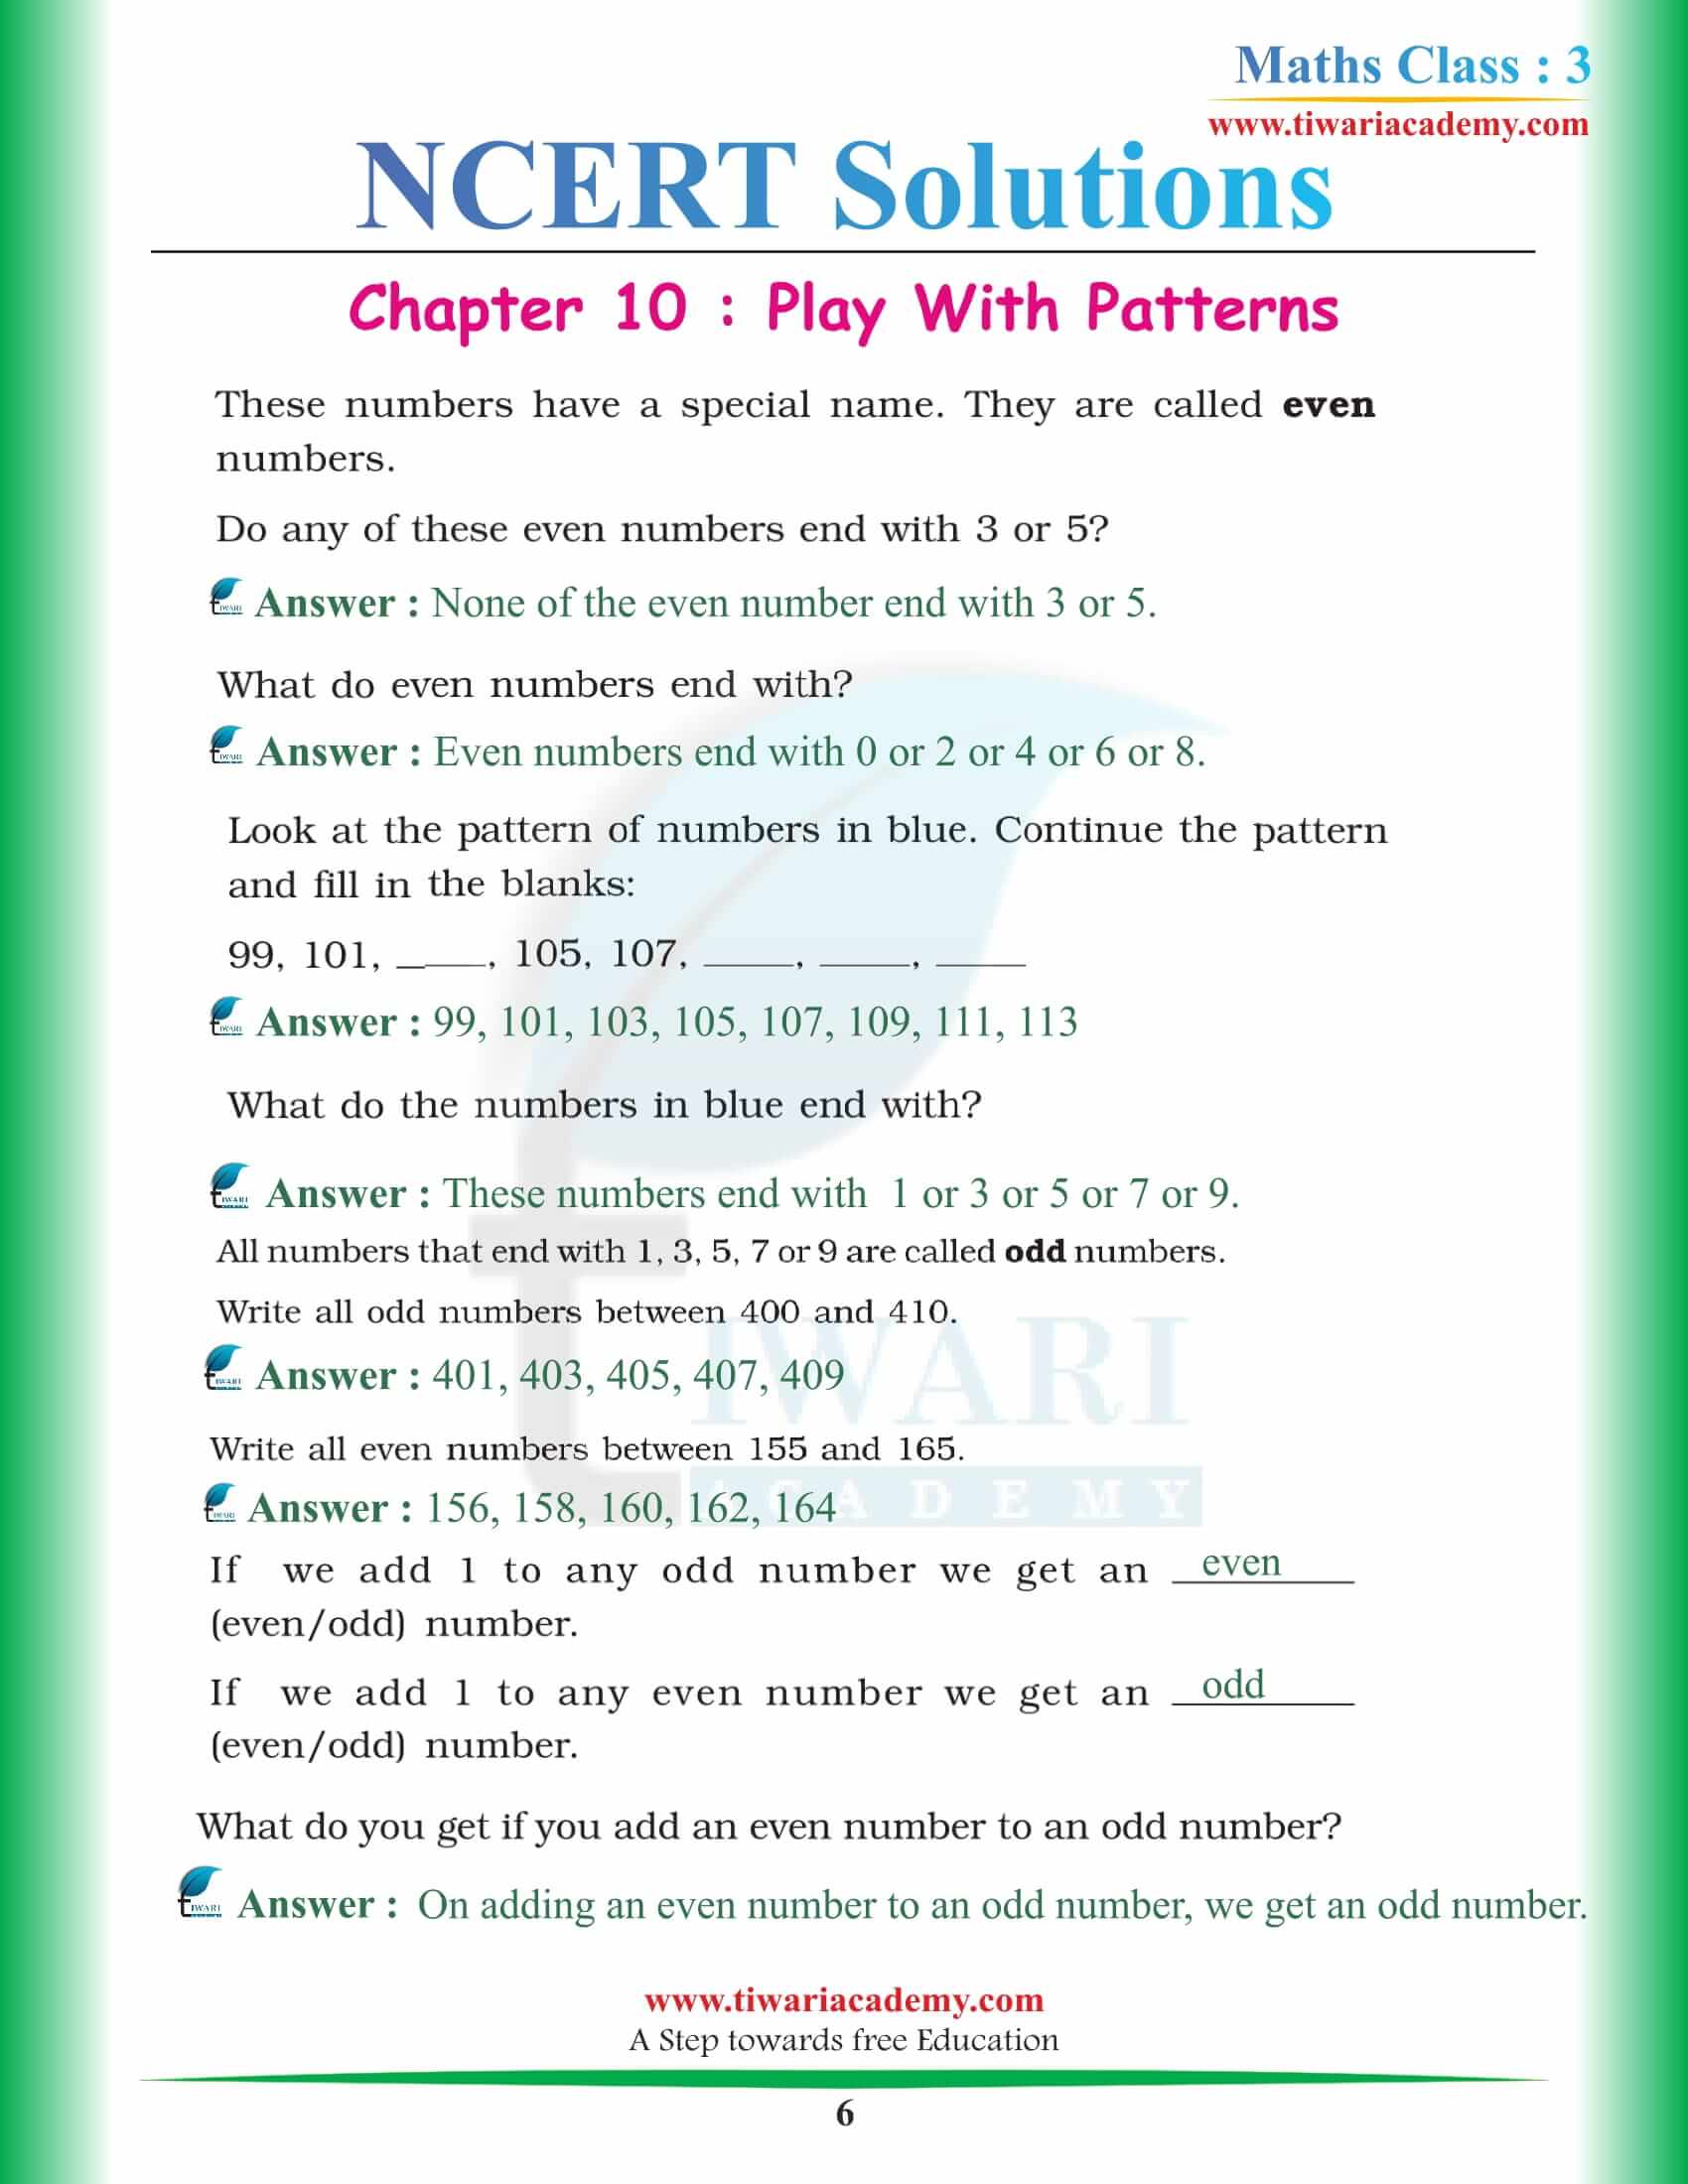 NCERT Solutions for Class 3 Maths Chapter 10 Question Answers